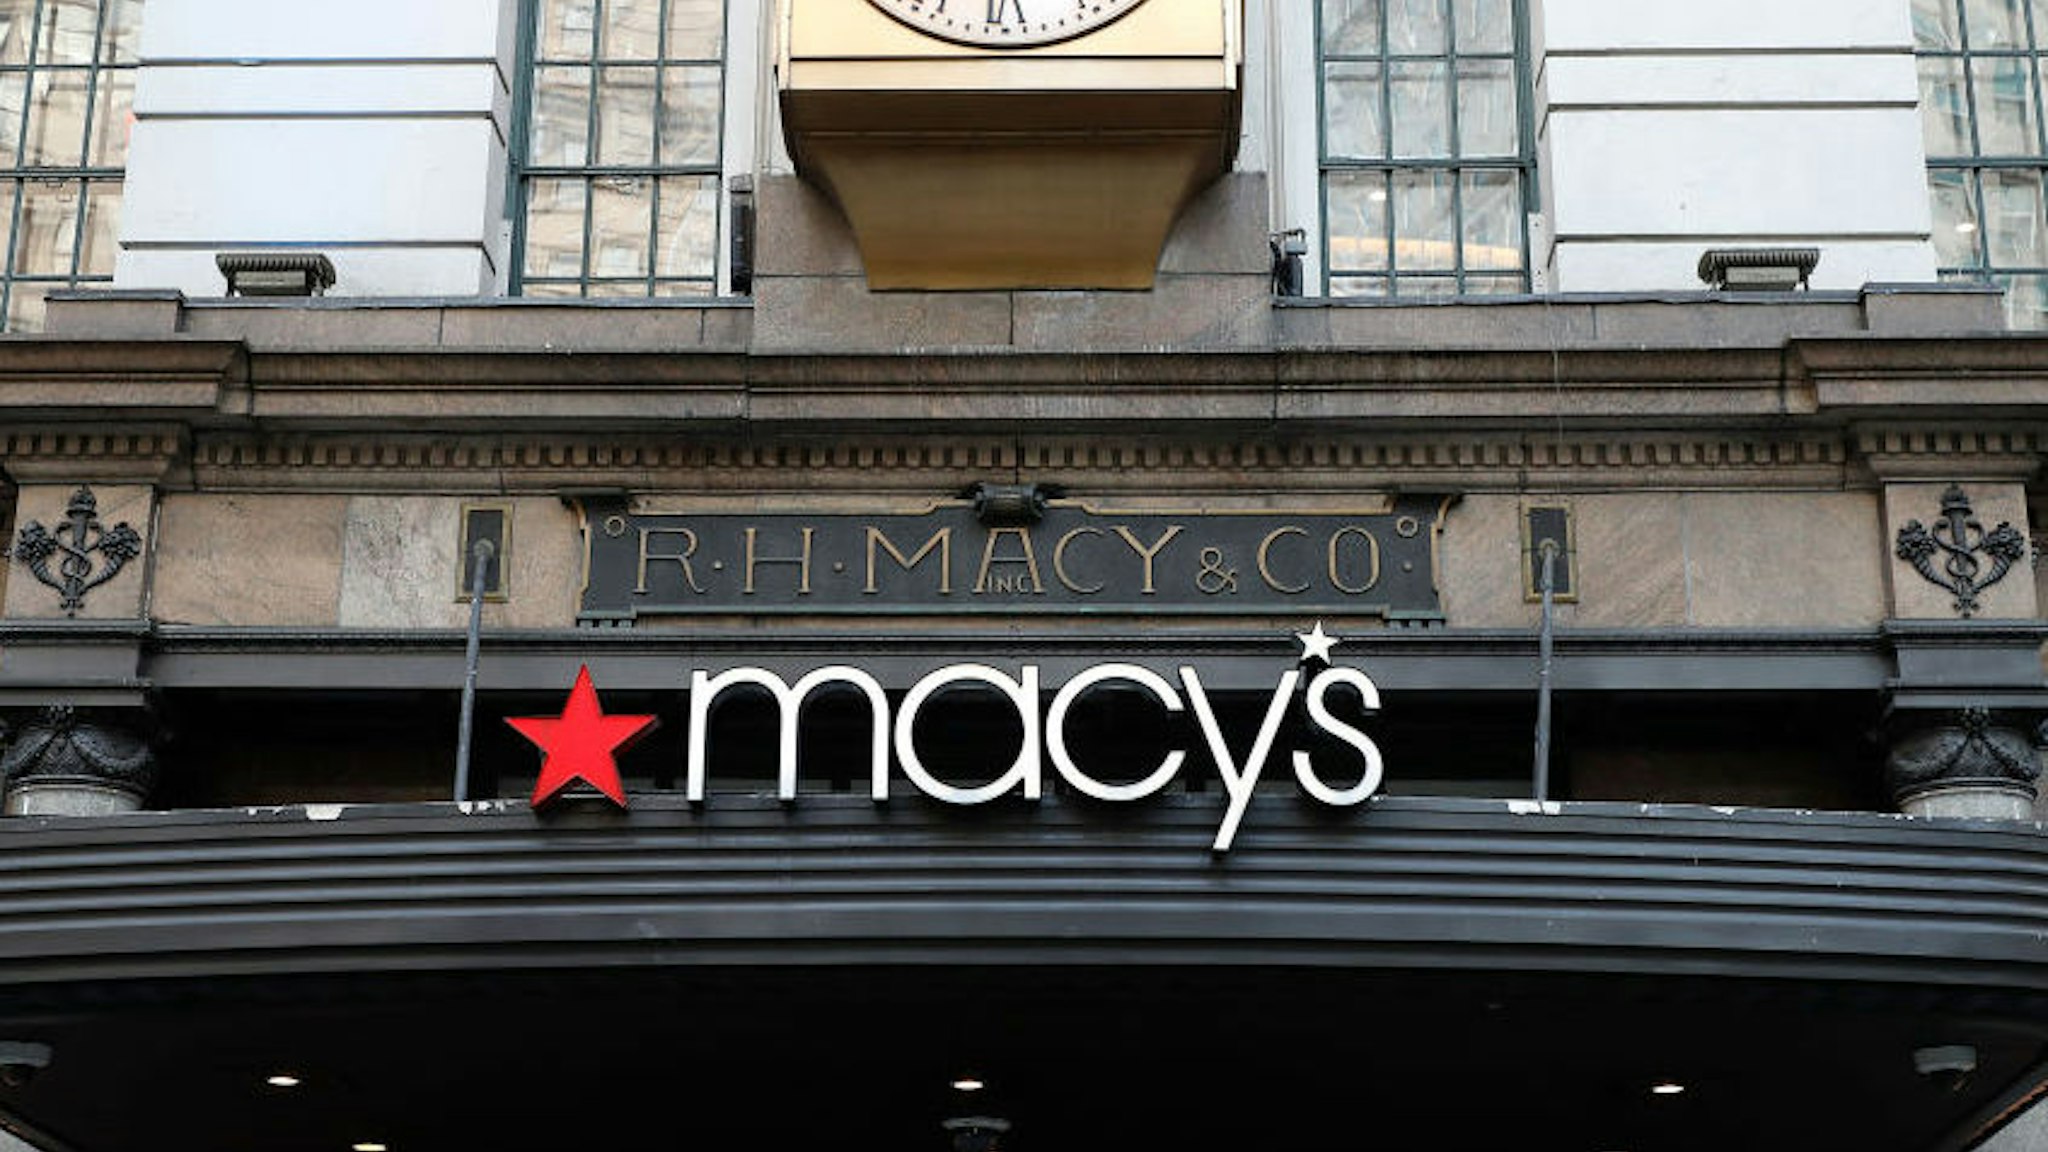 Macys logo is seen on one of their branches. (Photo by John Lamparski/SOPA Images/LightRocket via Getty Images)